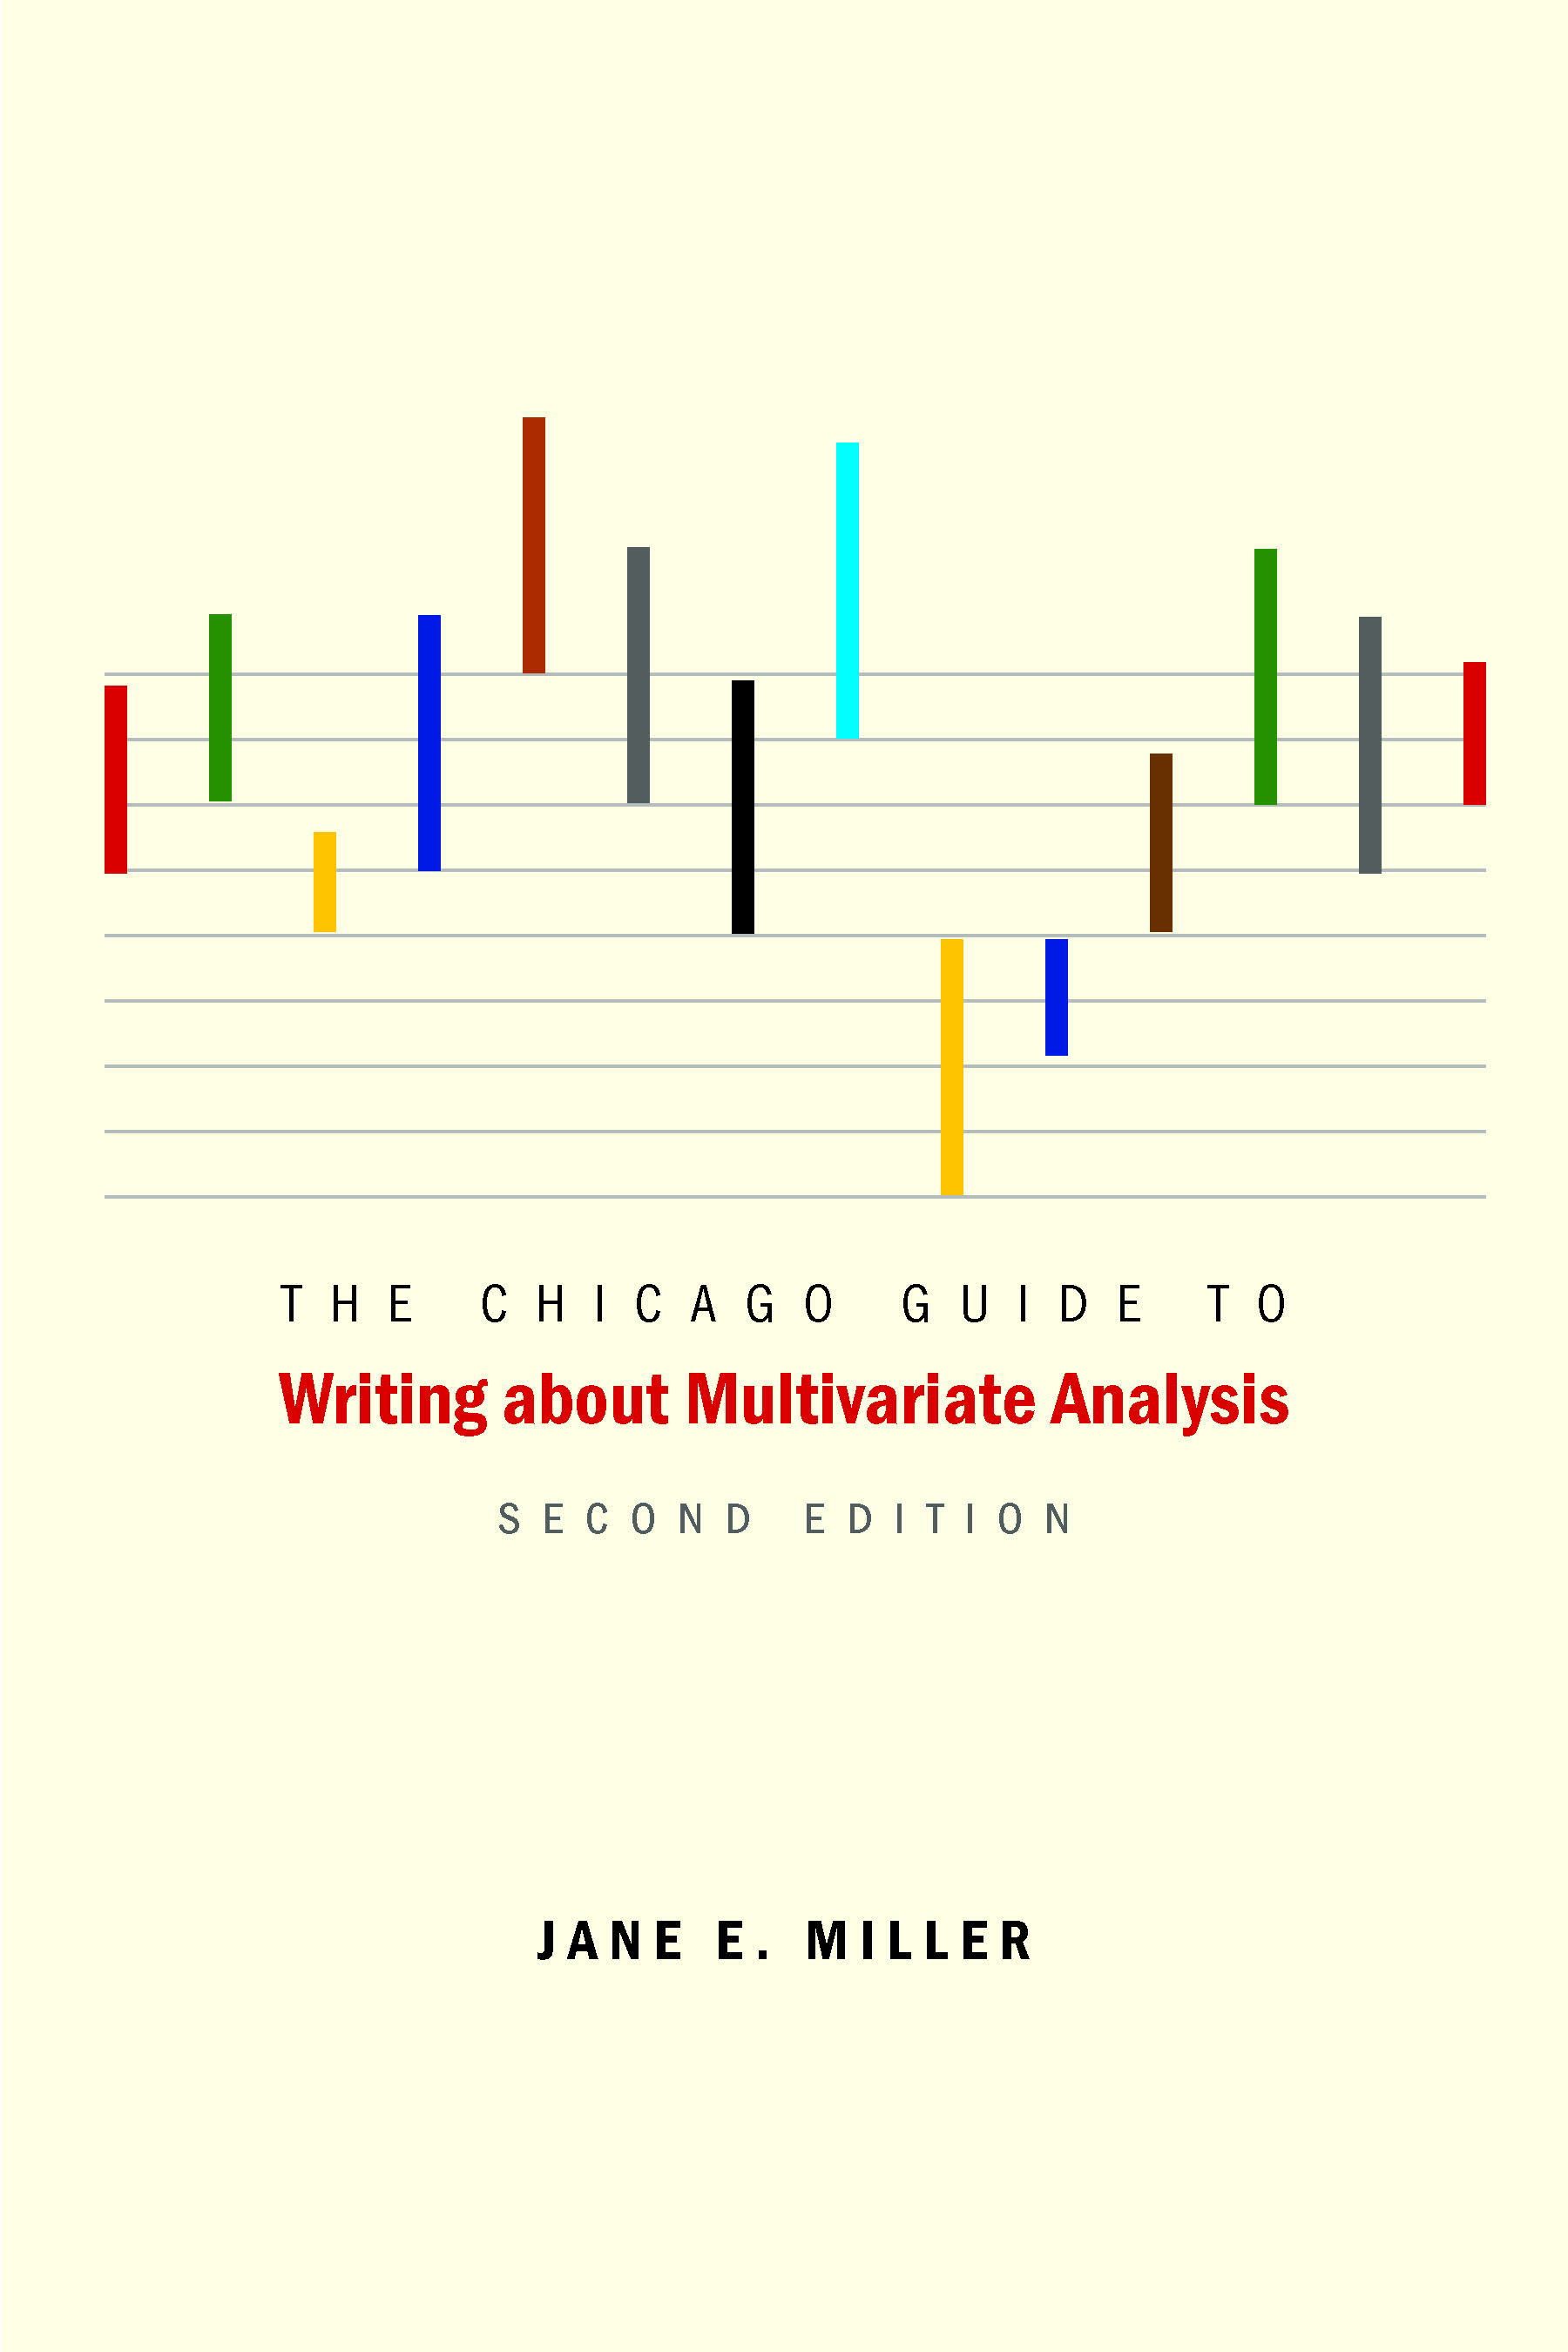 Book cover for Jane E. Miller, The Chicago Guide to Writing about Multivariate Analysis, Second Edition